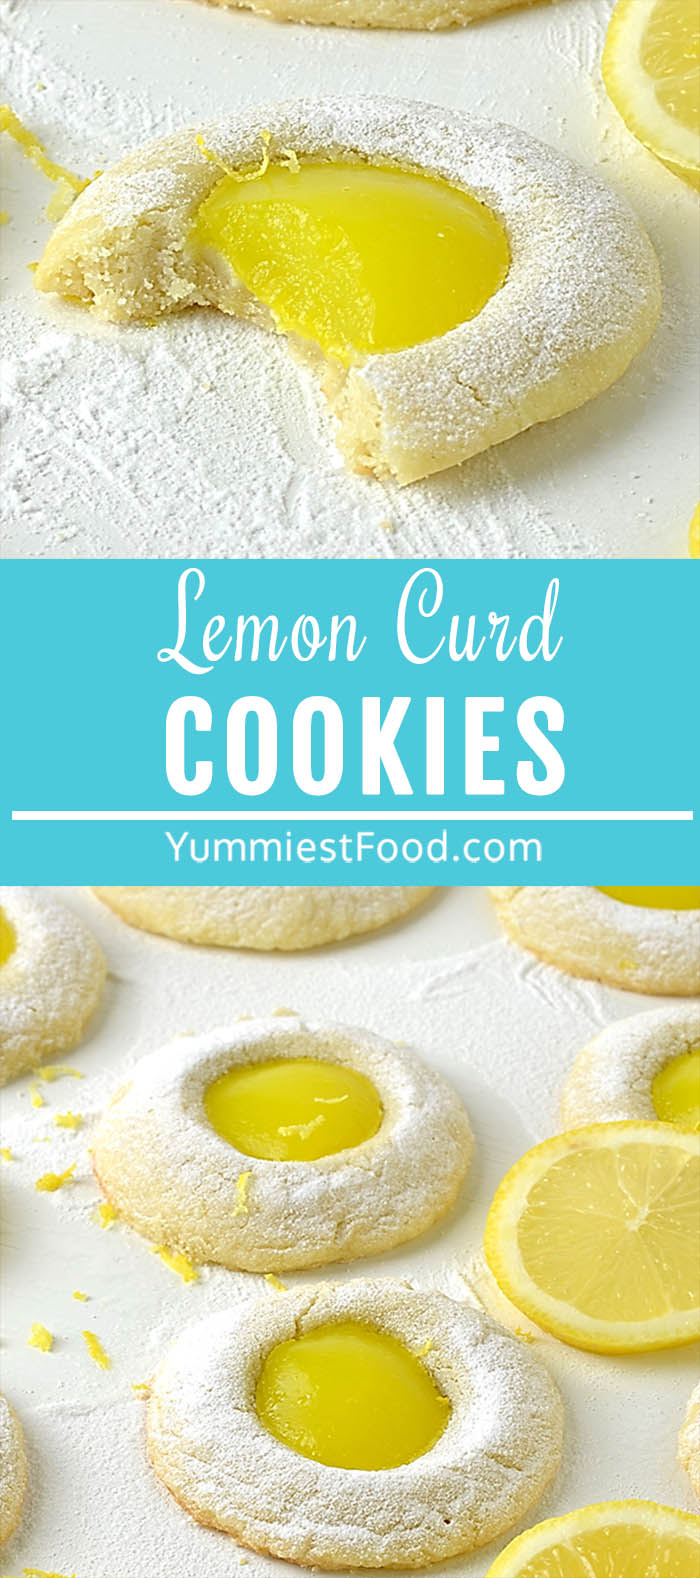 Lemon Curd Cookies are the most refreshing little bite of something sweet and delicious! Sweet, soft lemon thumbprints are filled with lemon curd and dusted with powdered sugar!